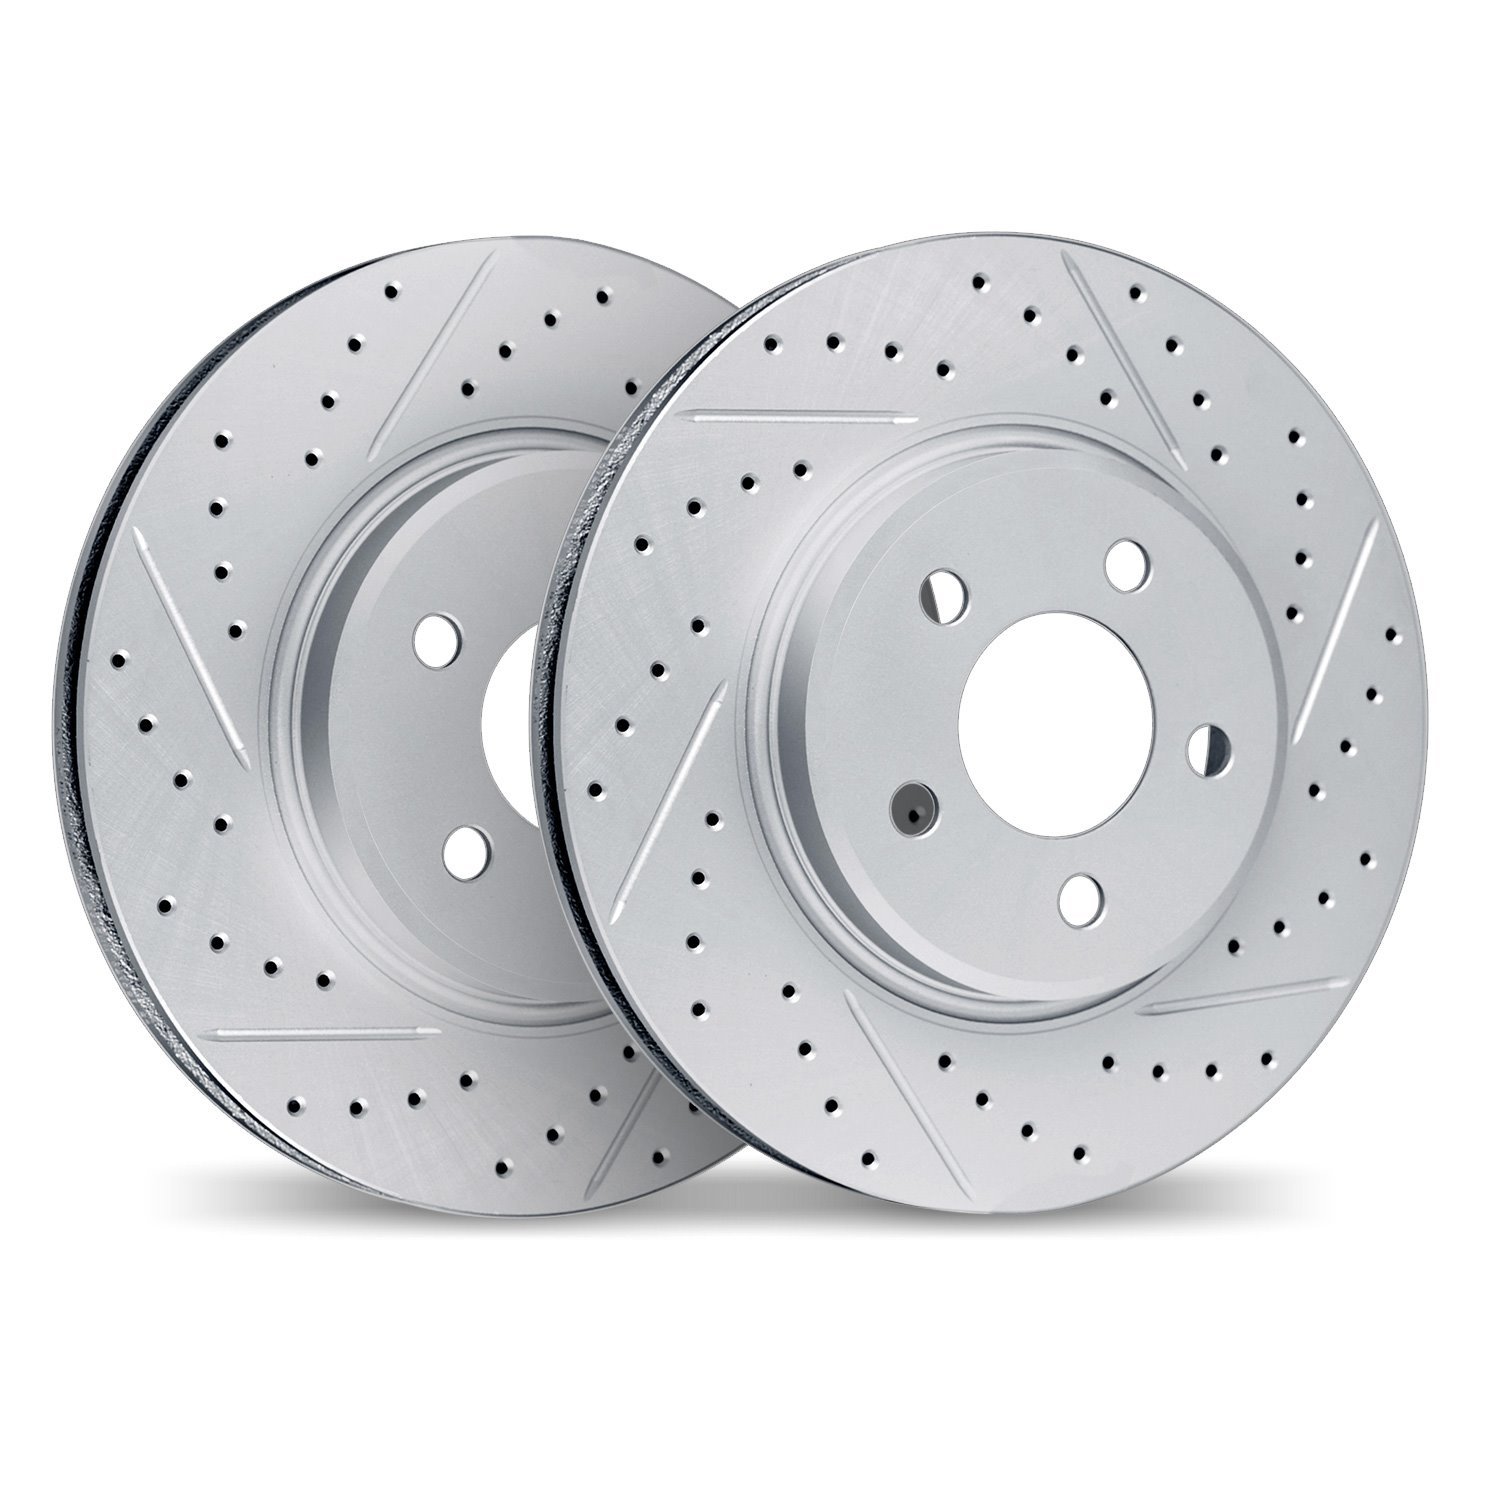 2002-31052 Geoperformance Drilled/Slotted Brake Rotors, 2000-2003 BMW, Position: Front